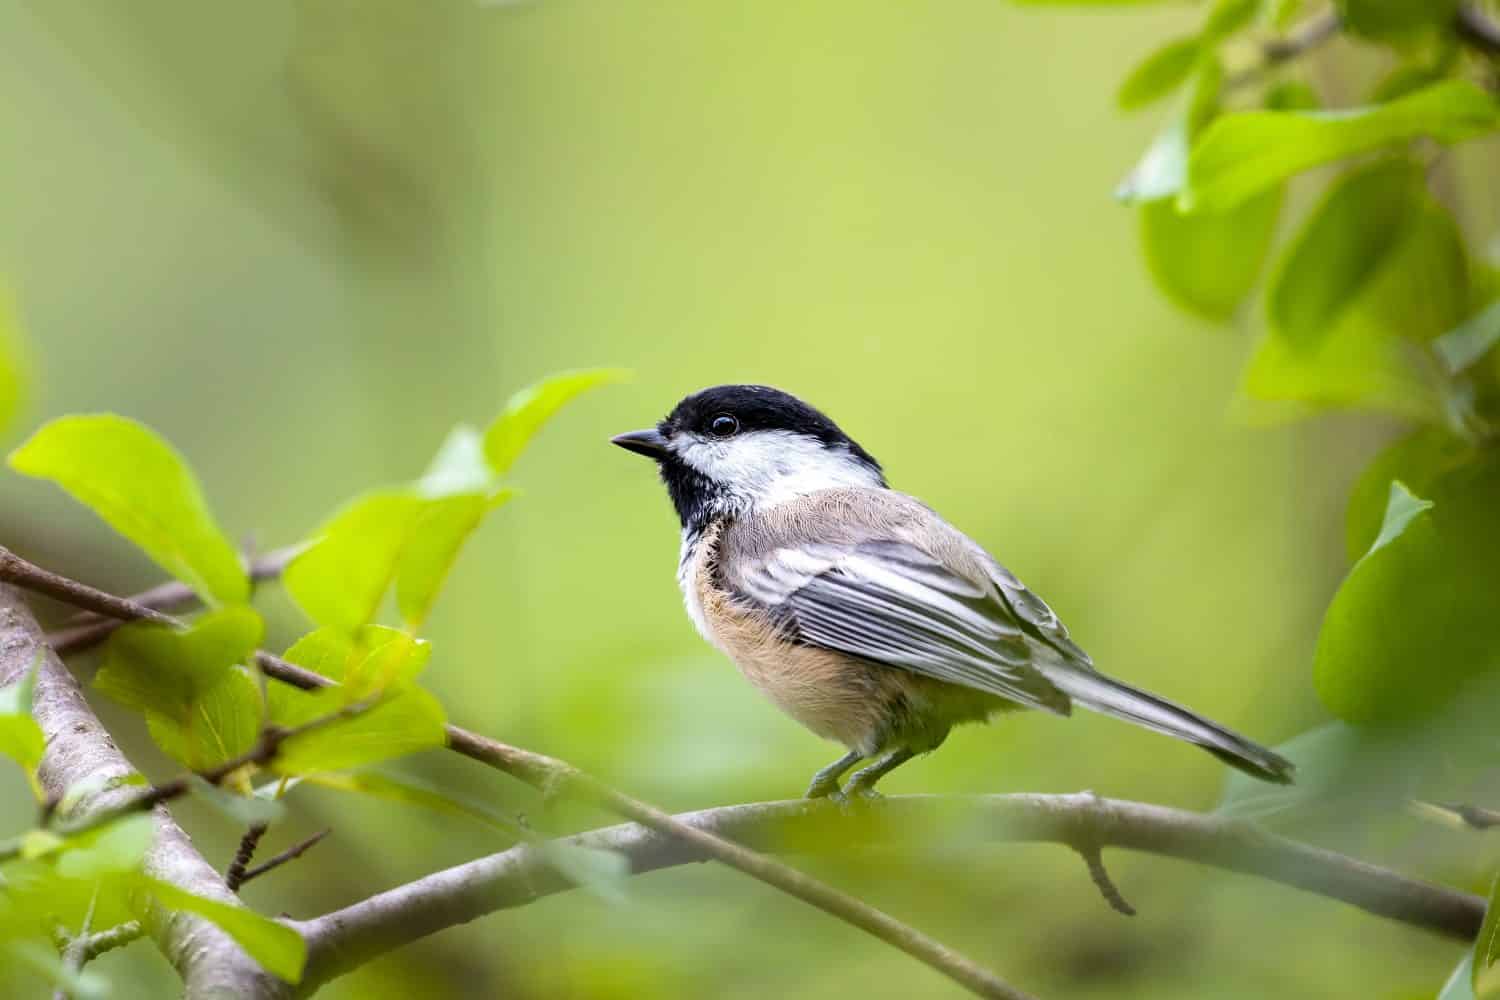 A very close shot (selective focus) of a Black-capped Chickadee in its habitat